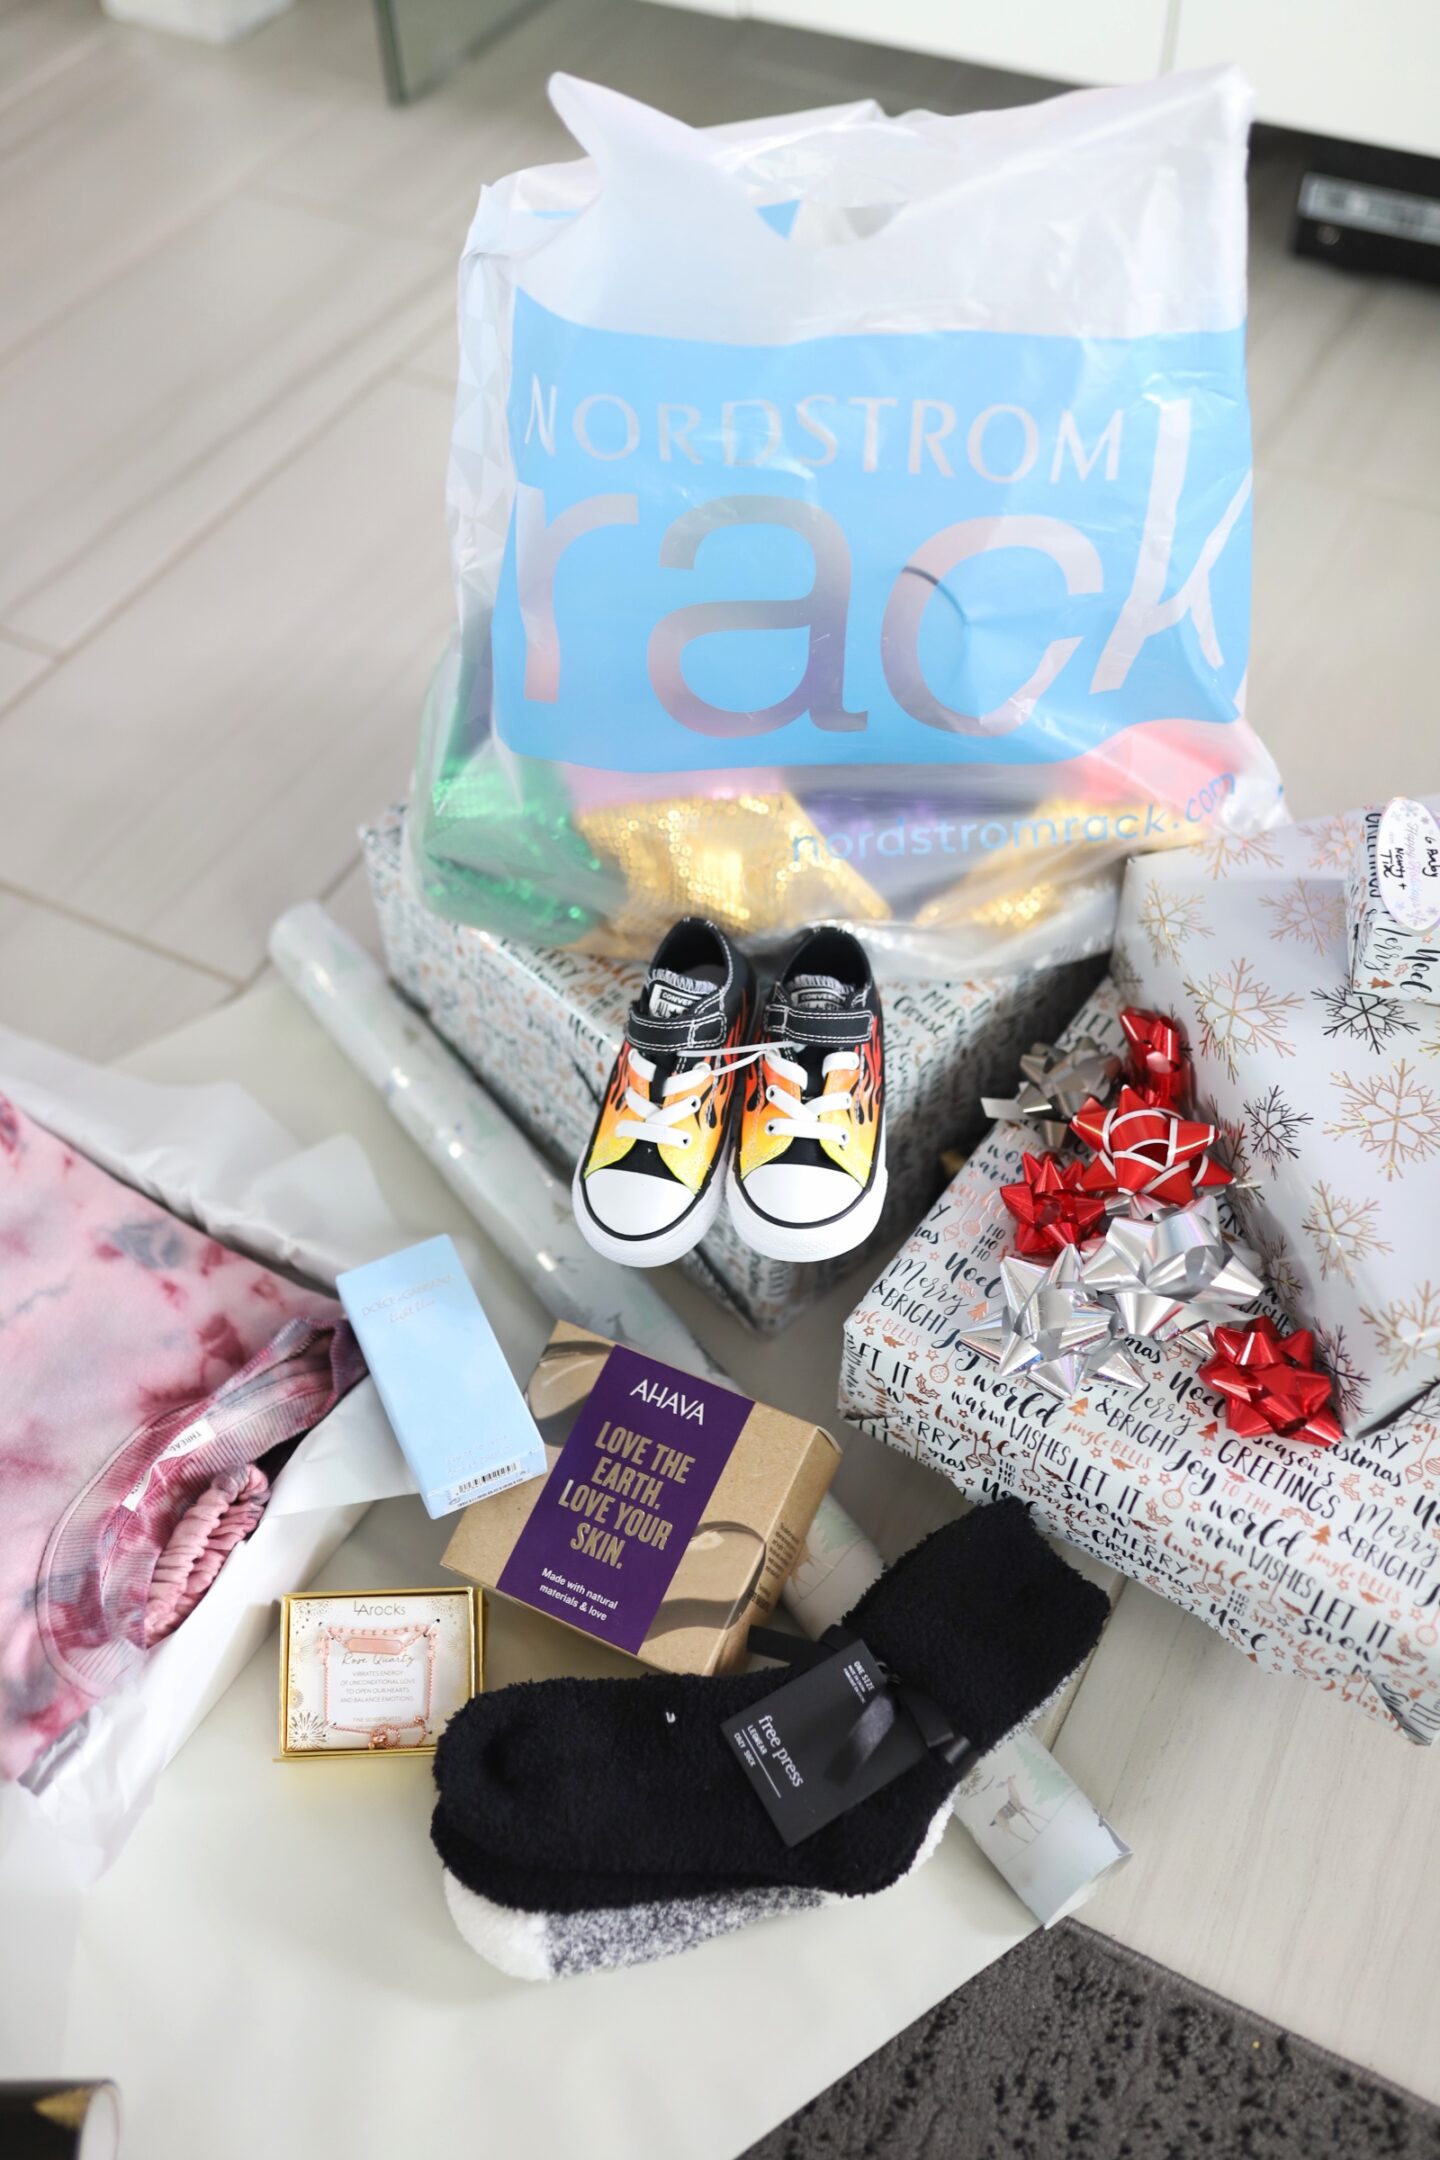 Last Minute Christmas Gift Ideas from Nordstrom Rack